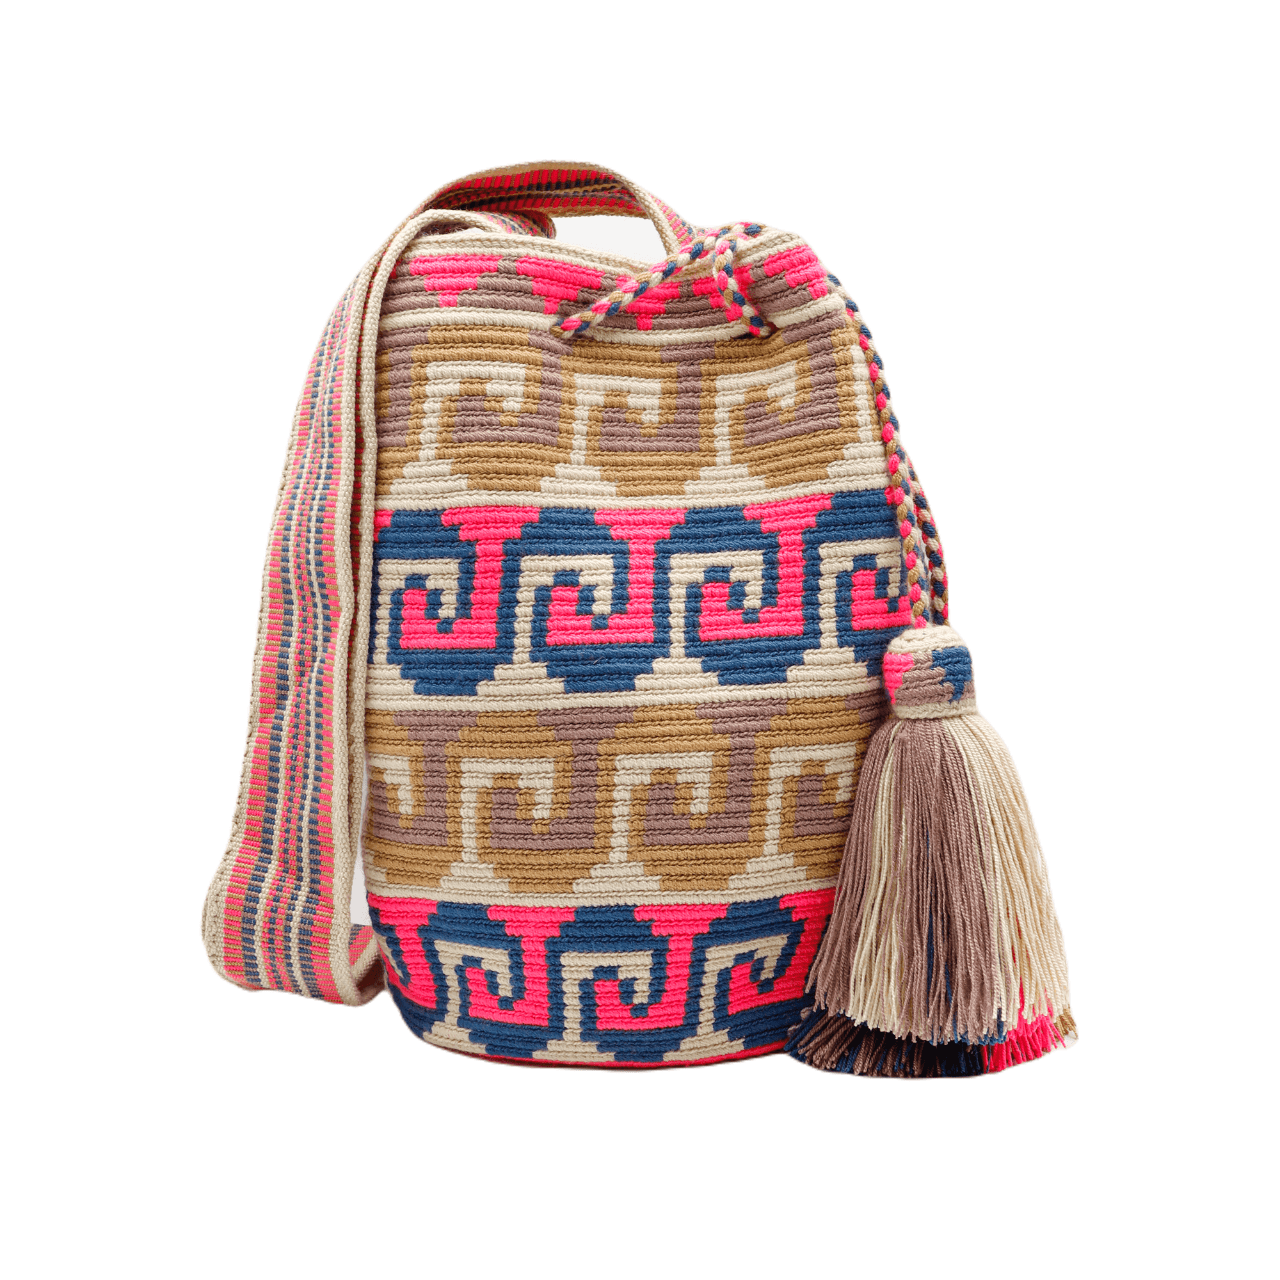 Shop the stylish Camilla Wayuu Bag featuring shades of beige, blue, and pink. This bag is the perfect everyday companion, providing ample space to carry all your essentials with ease and in fashionable style.